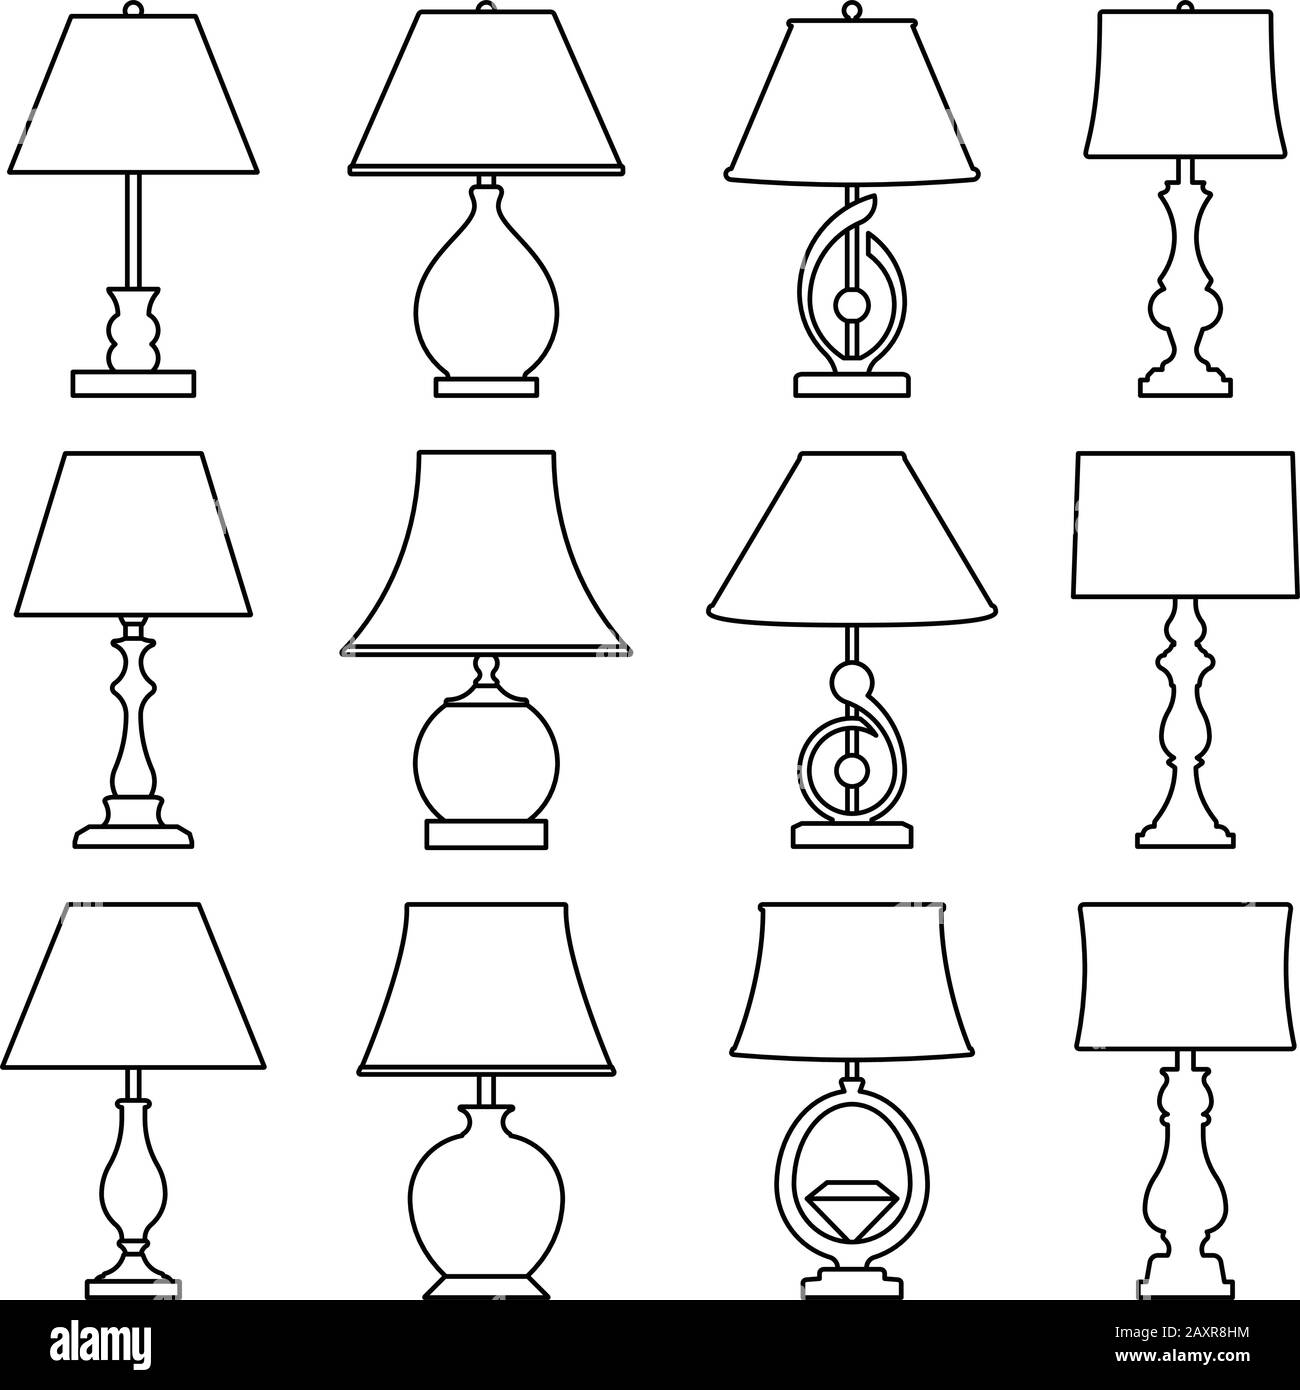 Premium Vector  Set of sketched table lamps with lampshades vector  illustration